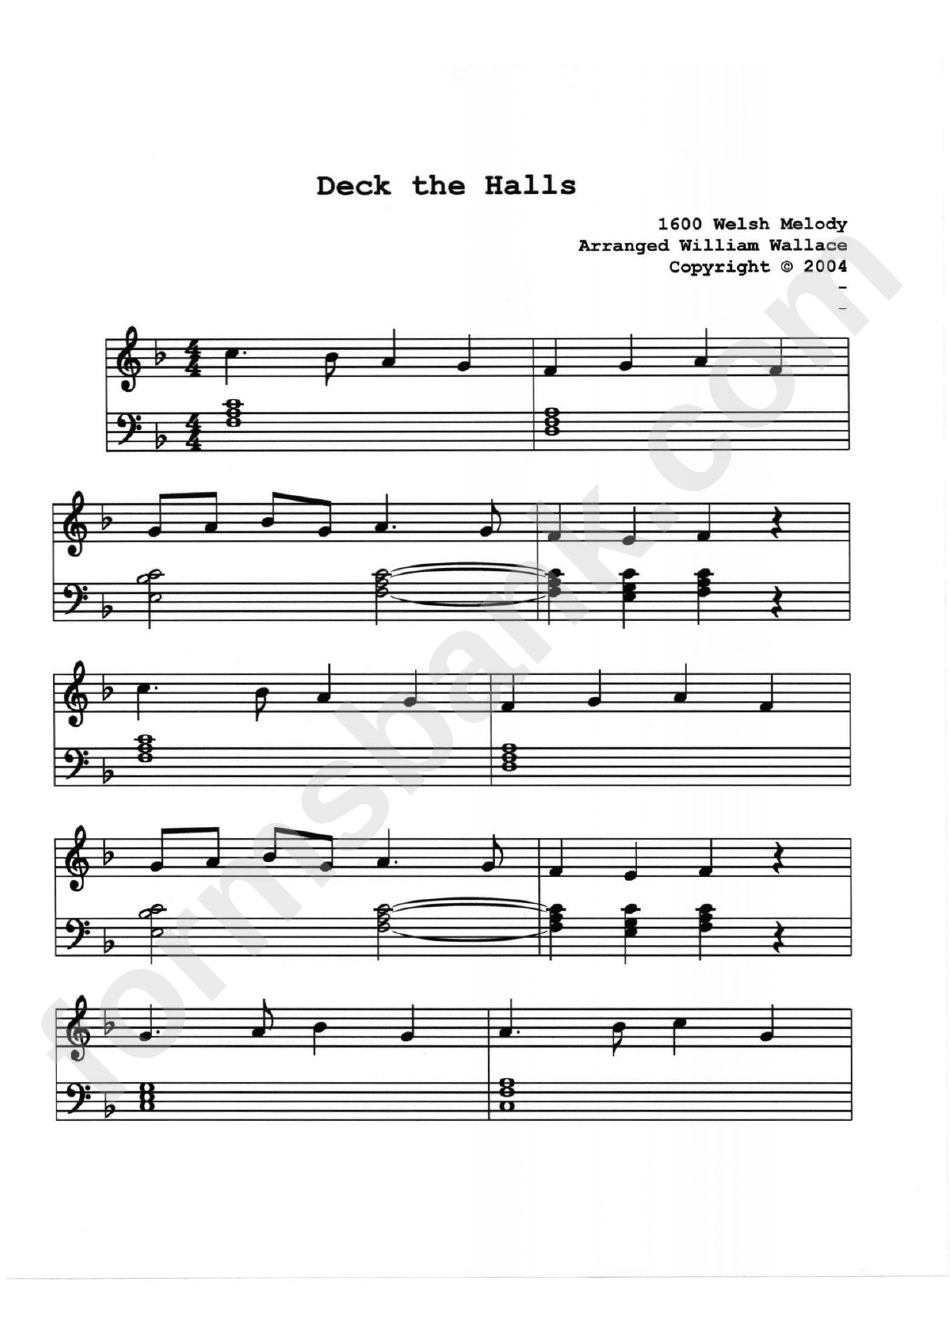 Deck The Halls (William Wallace) Piano Sheet Music printable pdf download